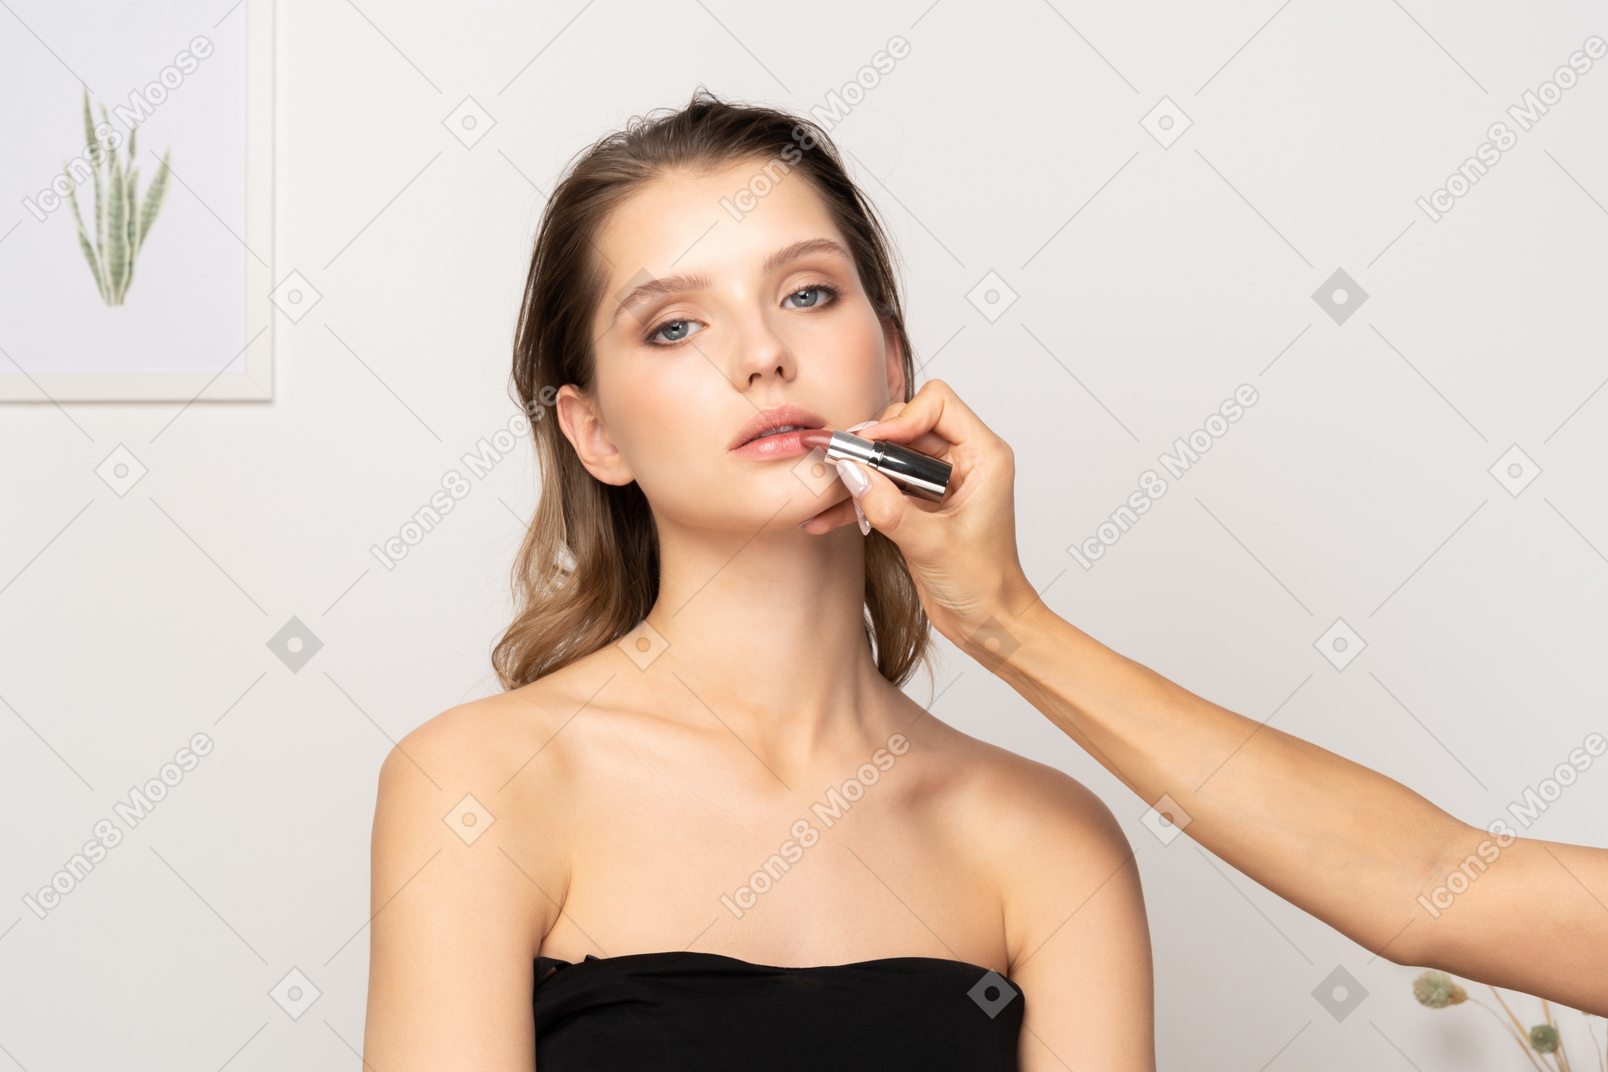 Front view of a make-up artist applying lipstick for a female model